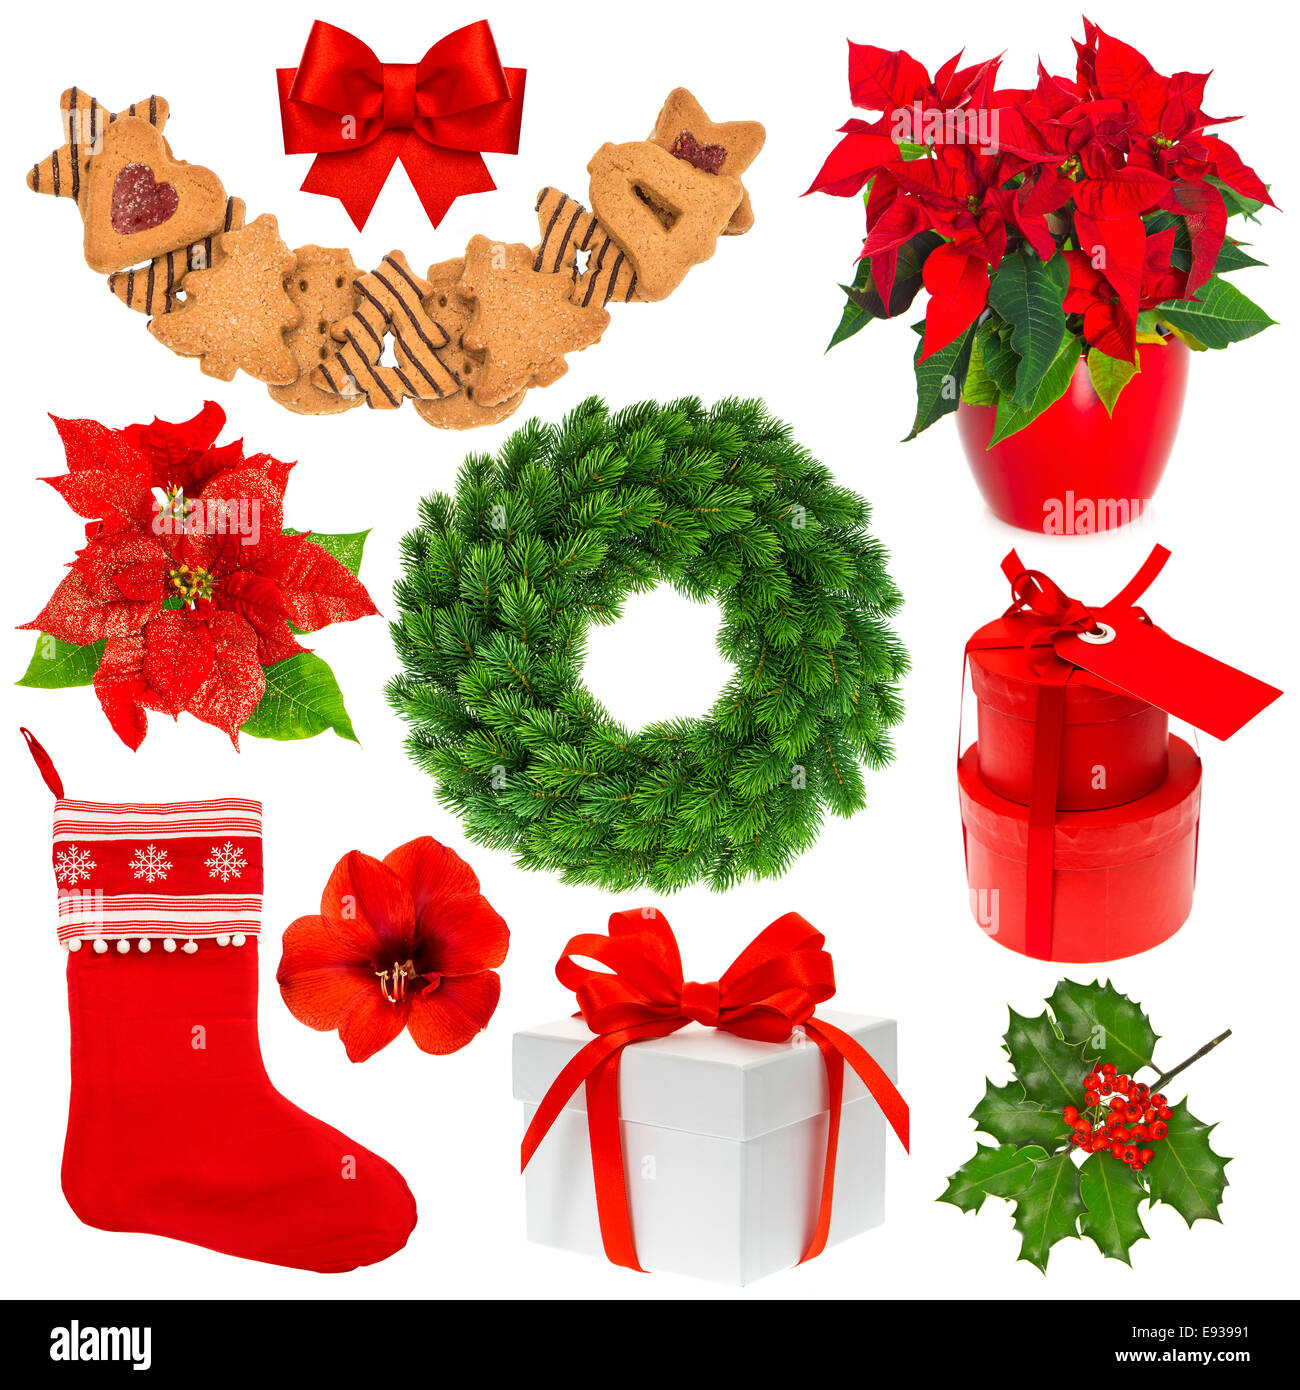 Christmas collection isolated on white background. Stocking, gifts, wreath, cookies, red flower Stock Photo